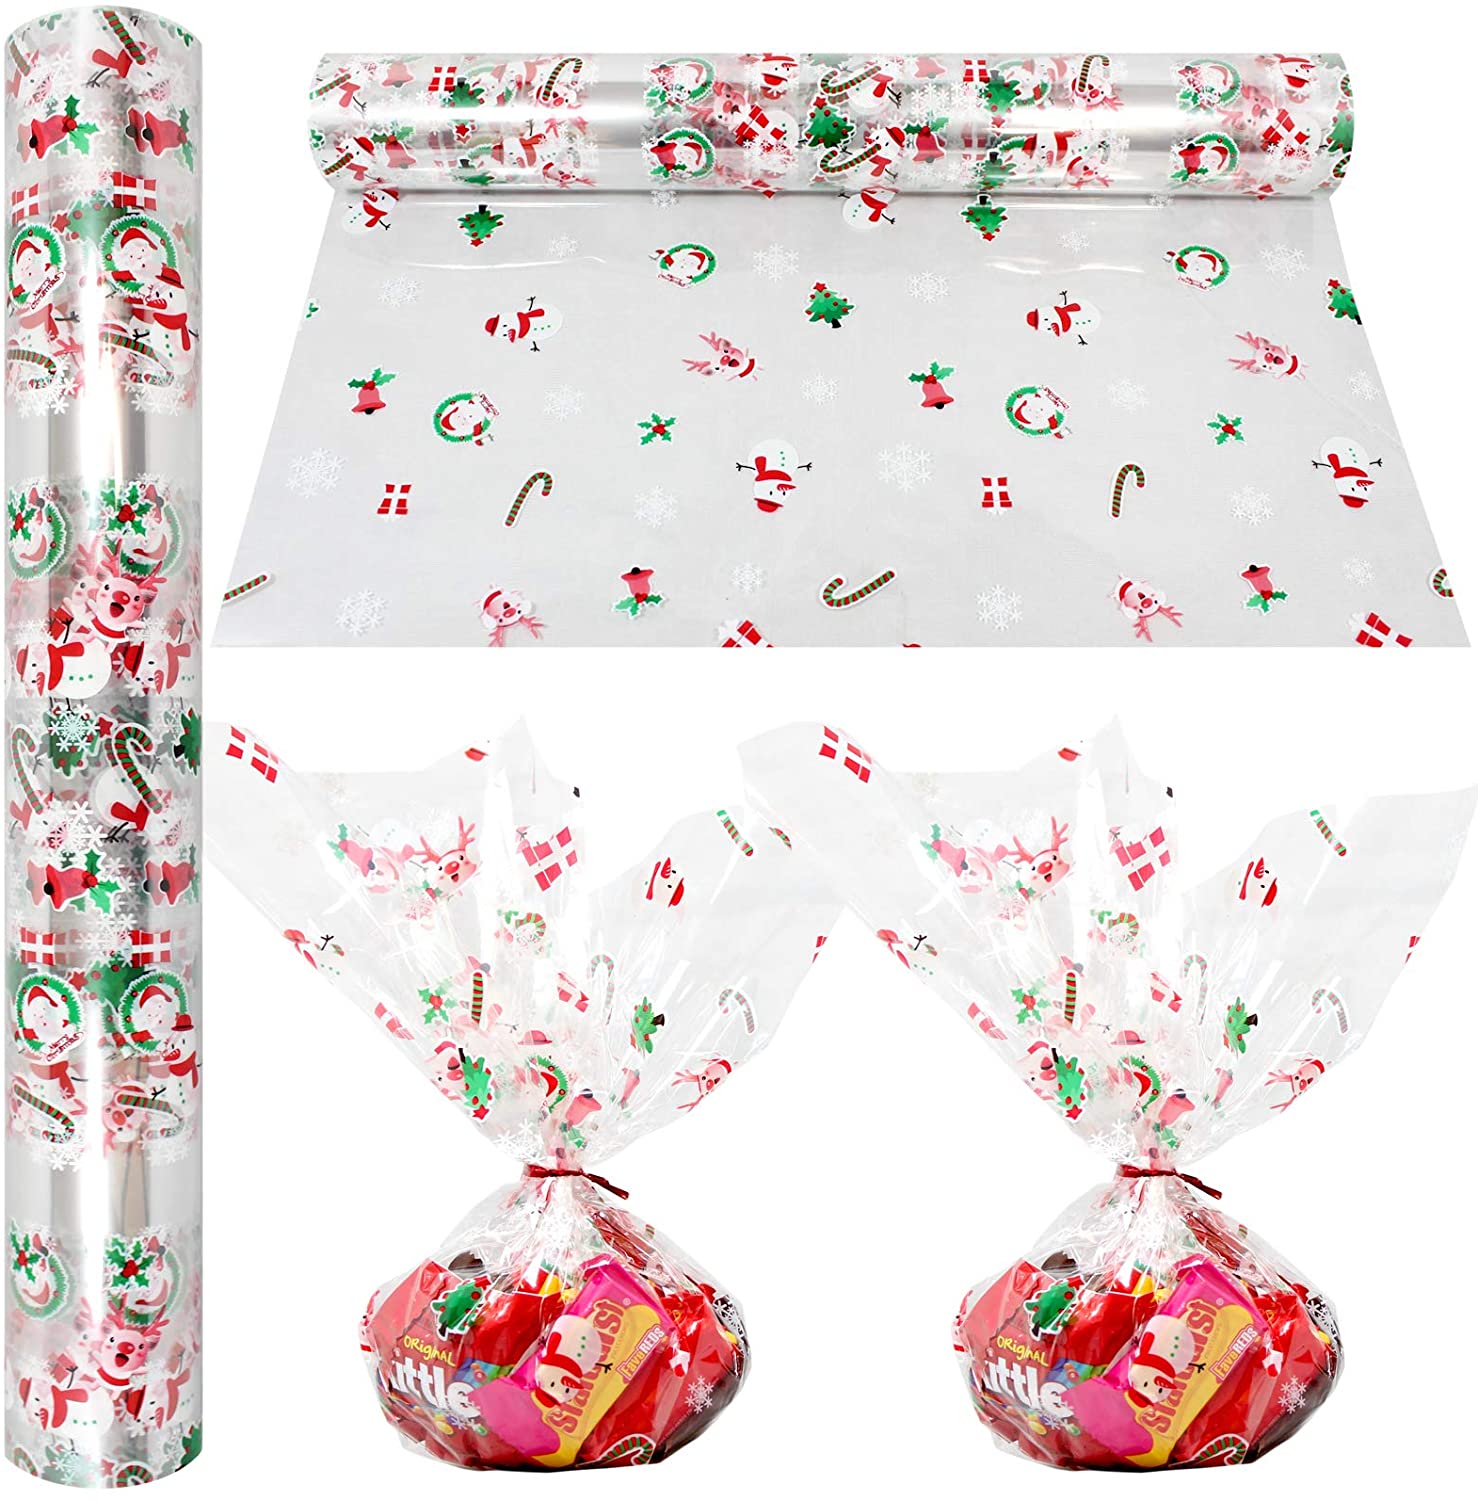 Christmas Cellophane Wrap Roll | 100' Ft. Long X 16” in. Wide | 2.3 Mil  Thick, Crystal Clear with Christmas Designs| Gifts, Baskets, Treats, Cello  Wrapping Paper | Santa, Snowman Cello Roll | Anapoliz - Walmart.com